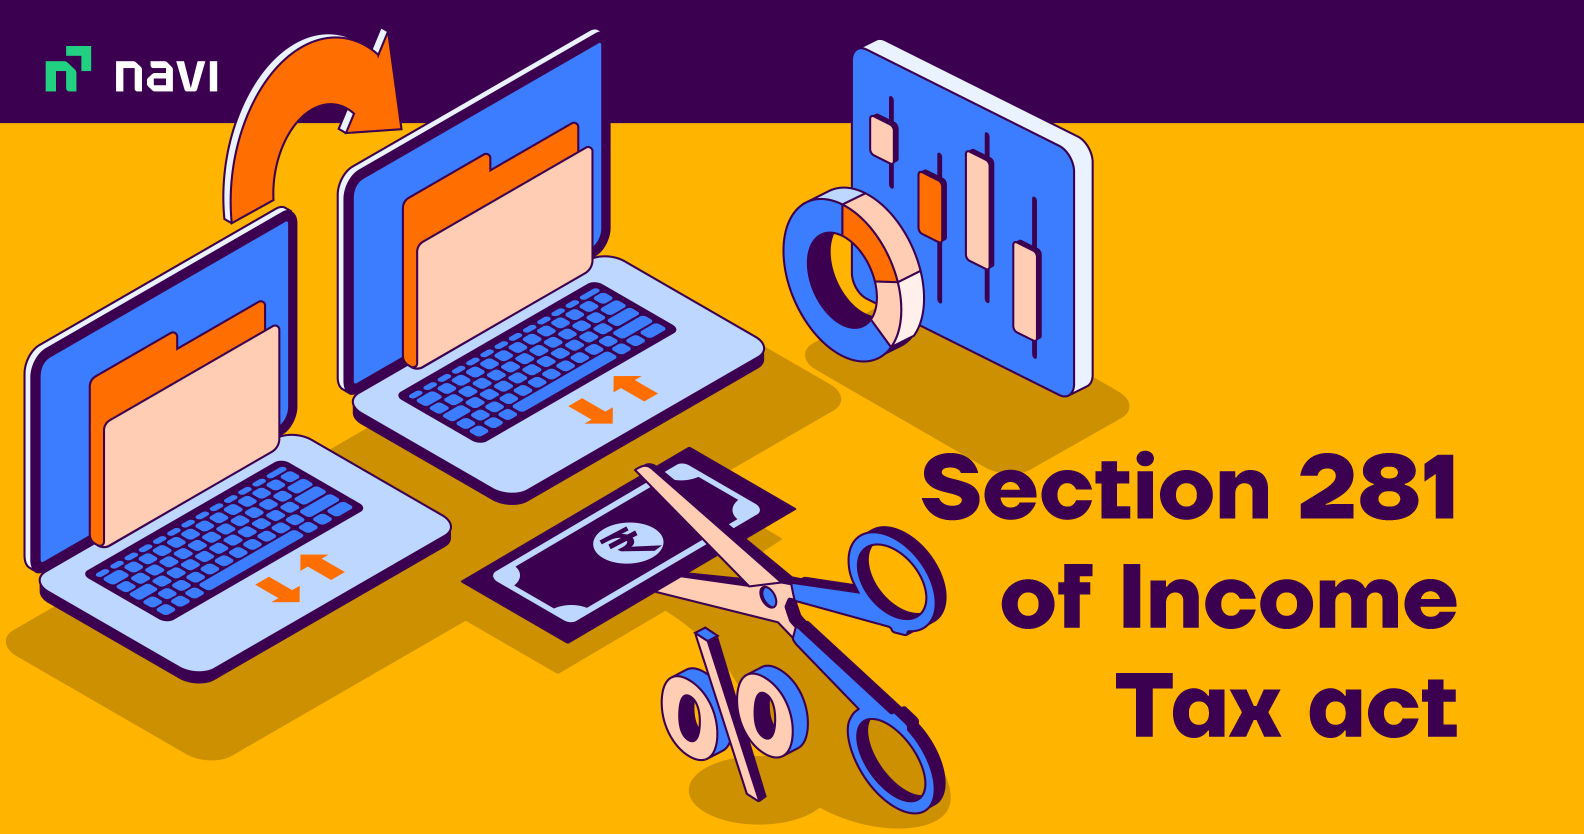 Section 281 of the Income Tax Act